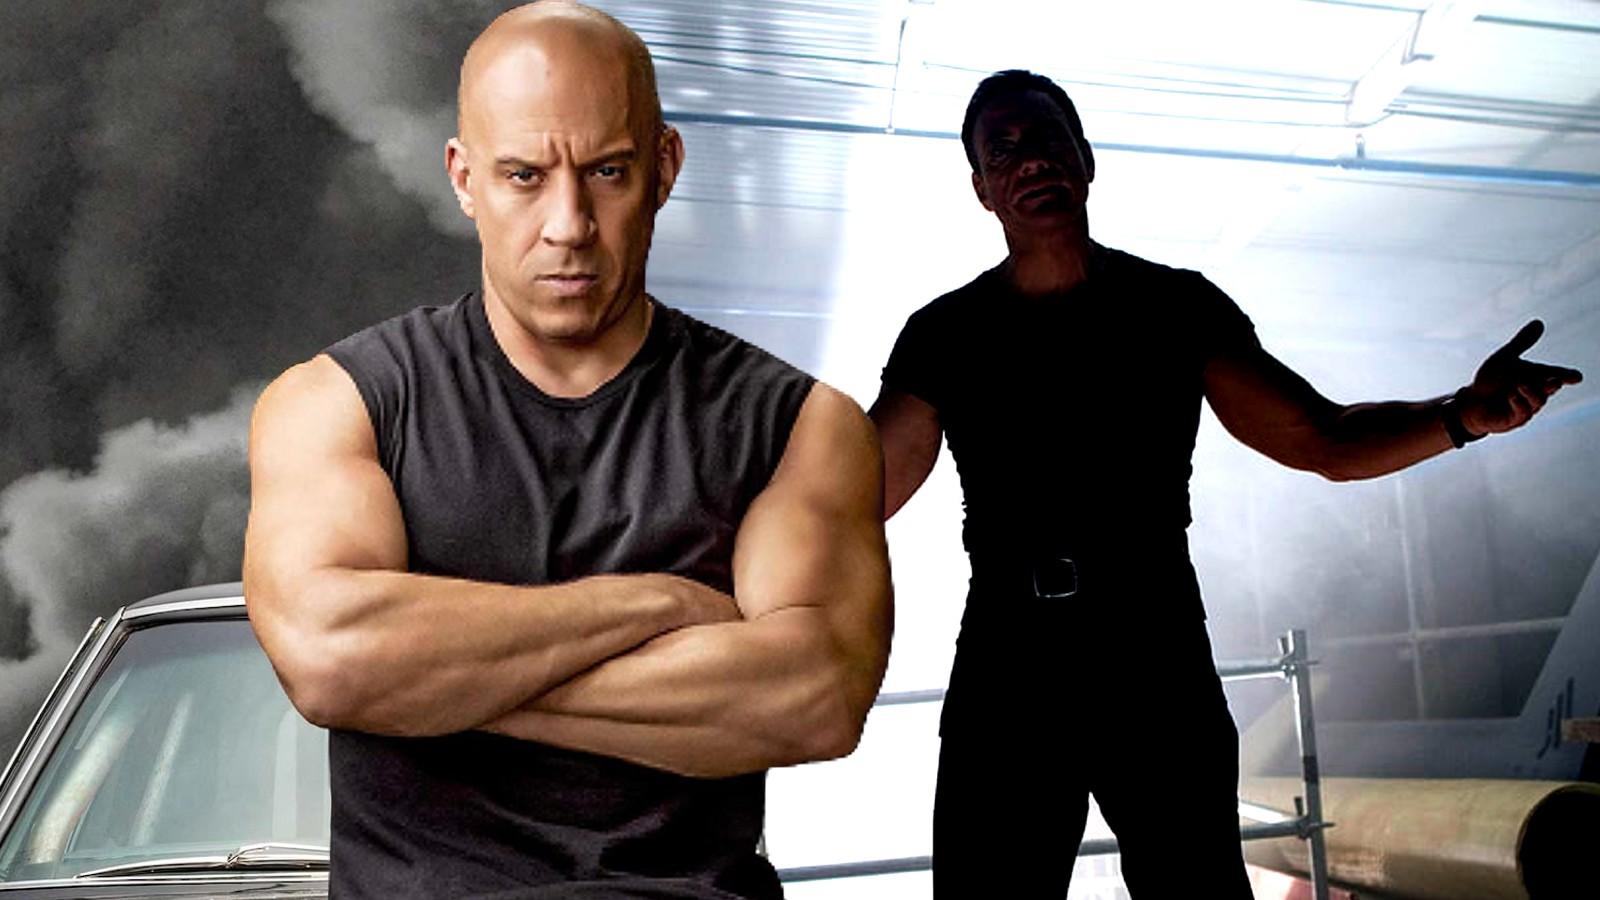 Vin Diesel and Jean-Claude Van Damme in The Expendables 2